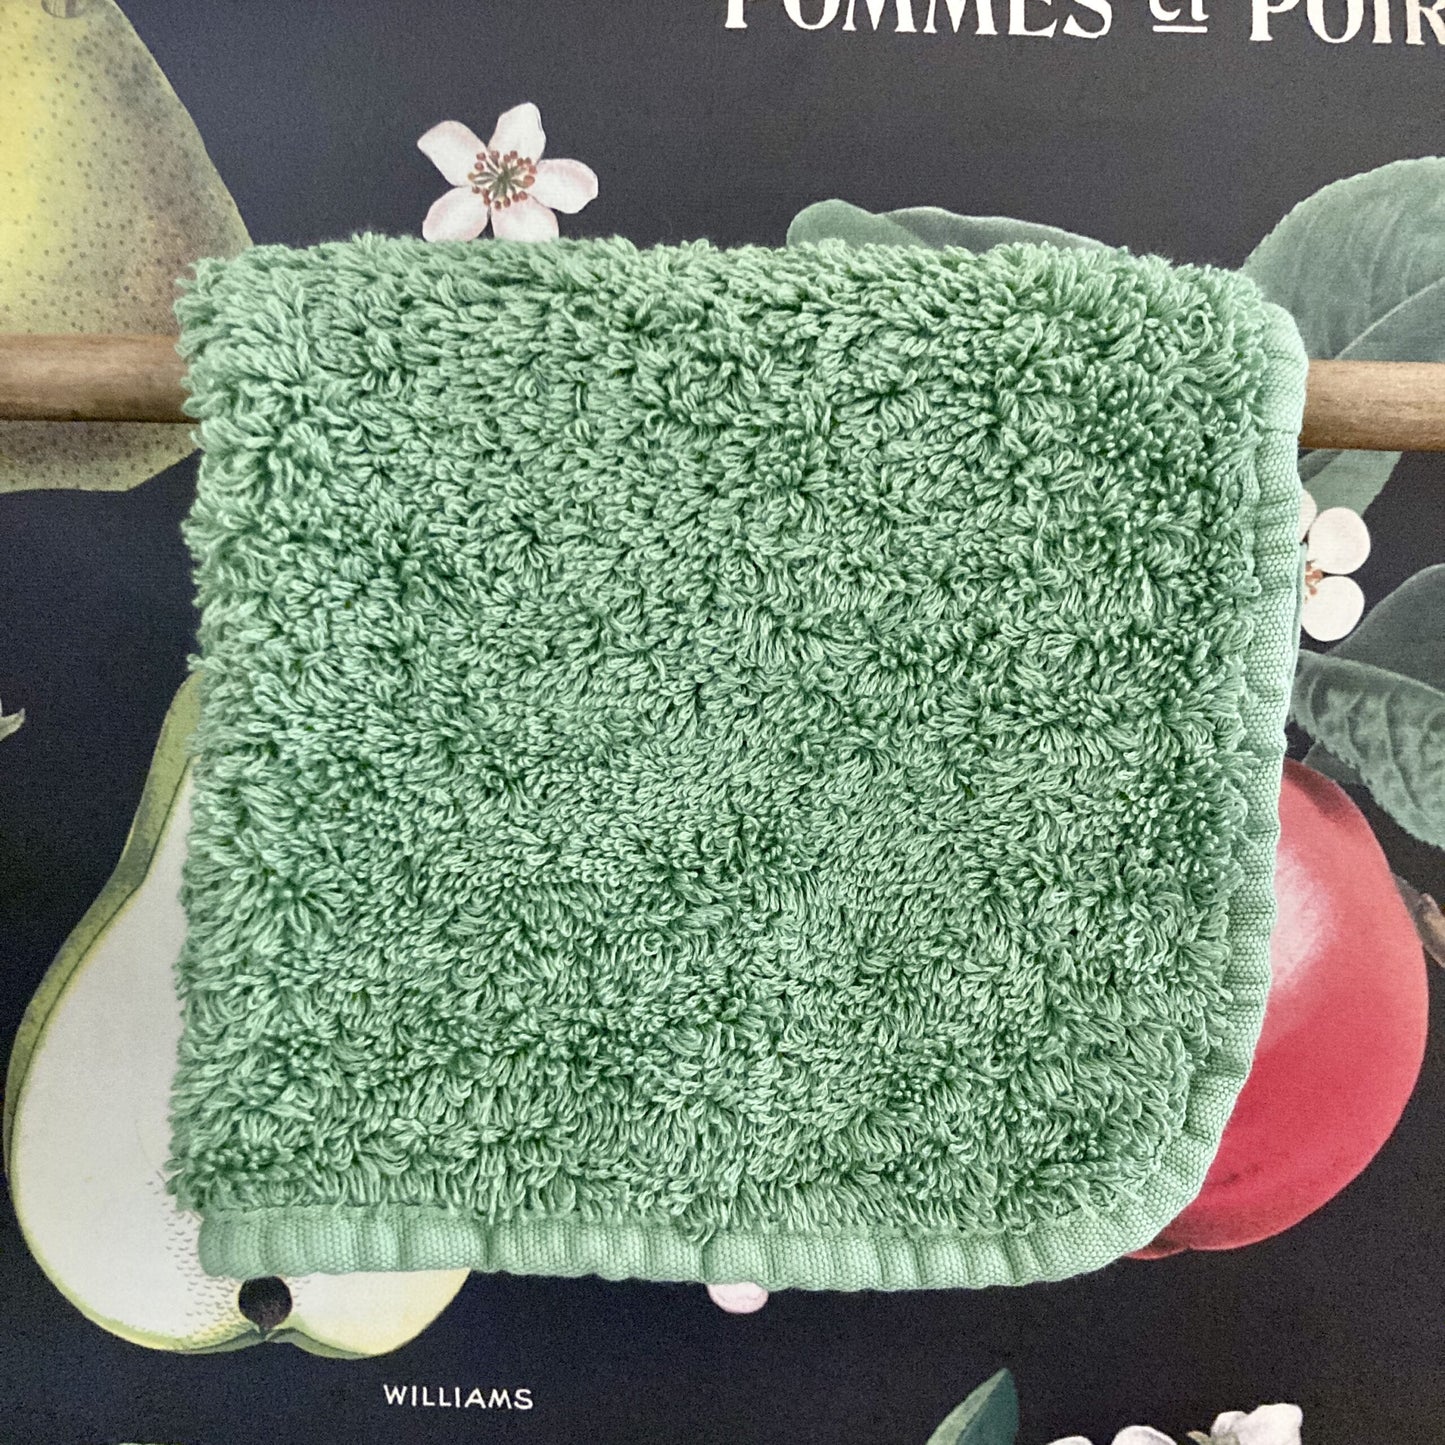 Forest Green Wash Towel